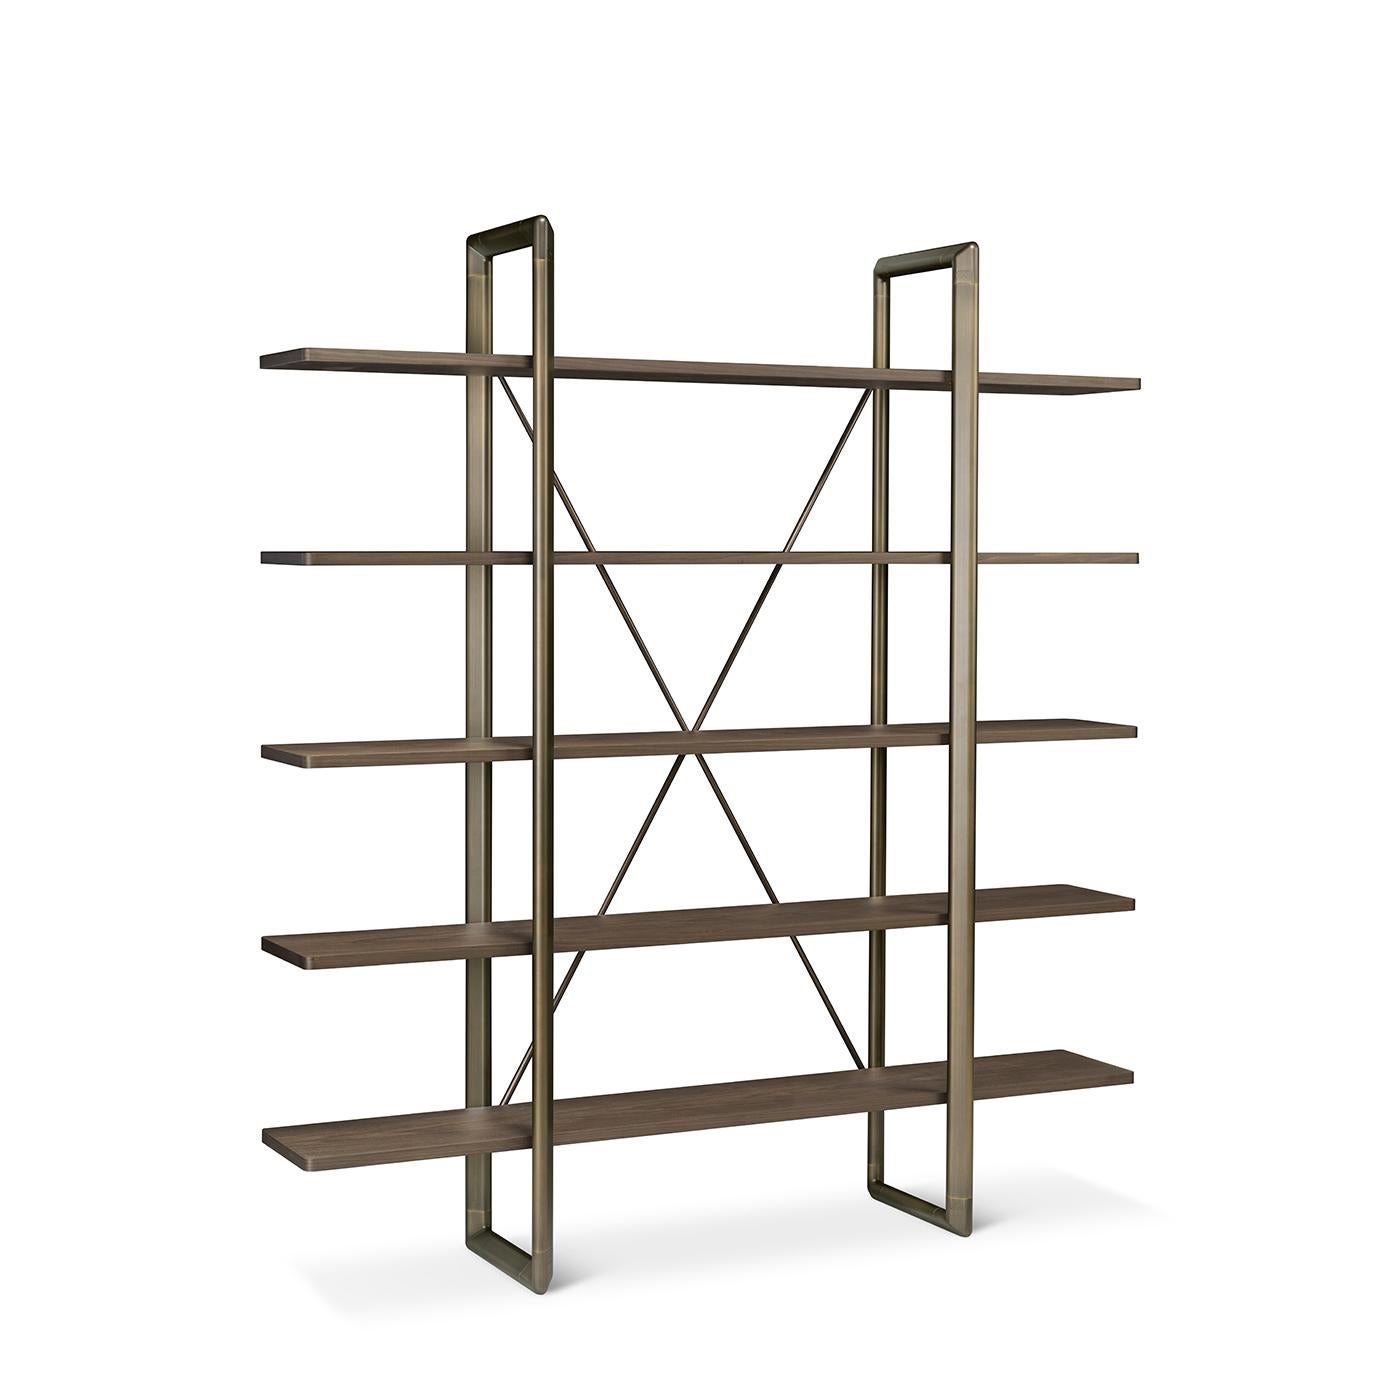 A clean and essential design of strong geometrical value, this striking bookcase will make a bold and stately addition to any contemporary decor. Featuring two vertical supports and a crisscrossed back in brass, it is composed of five open shelves